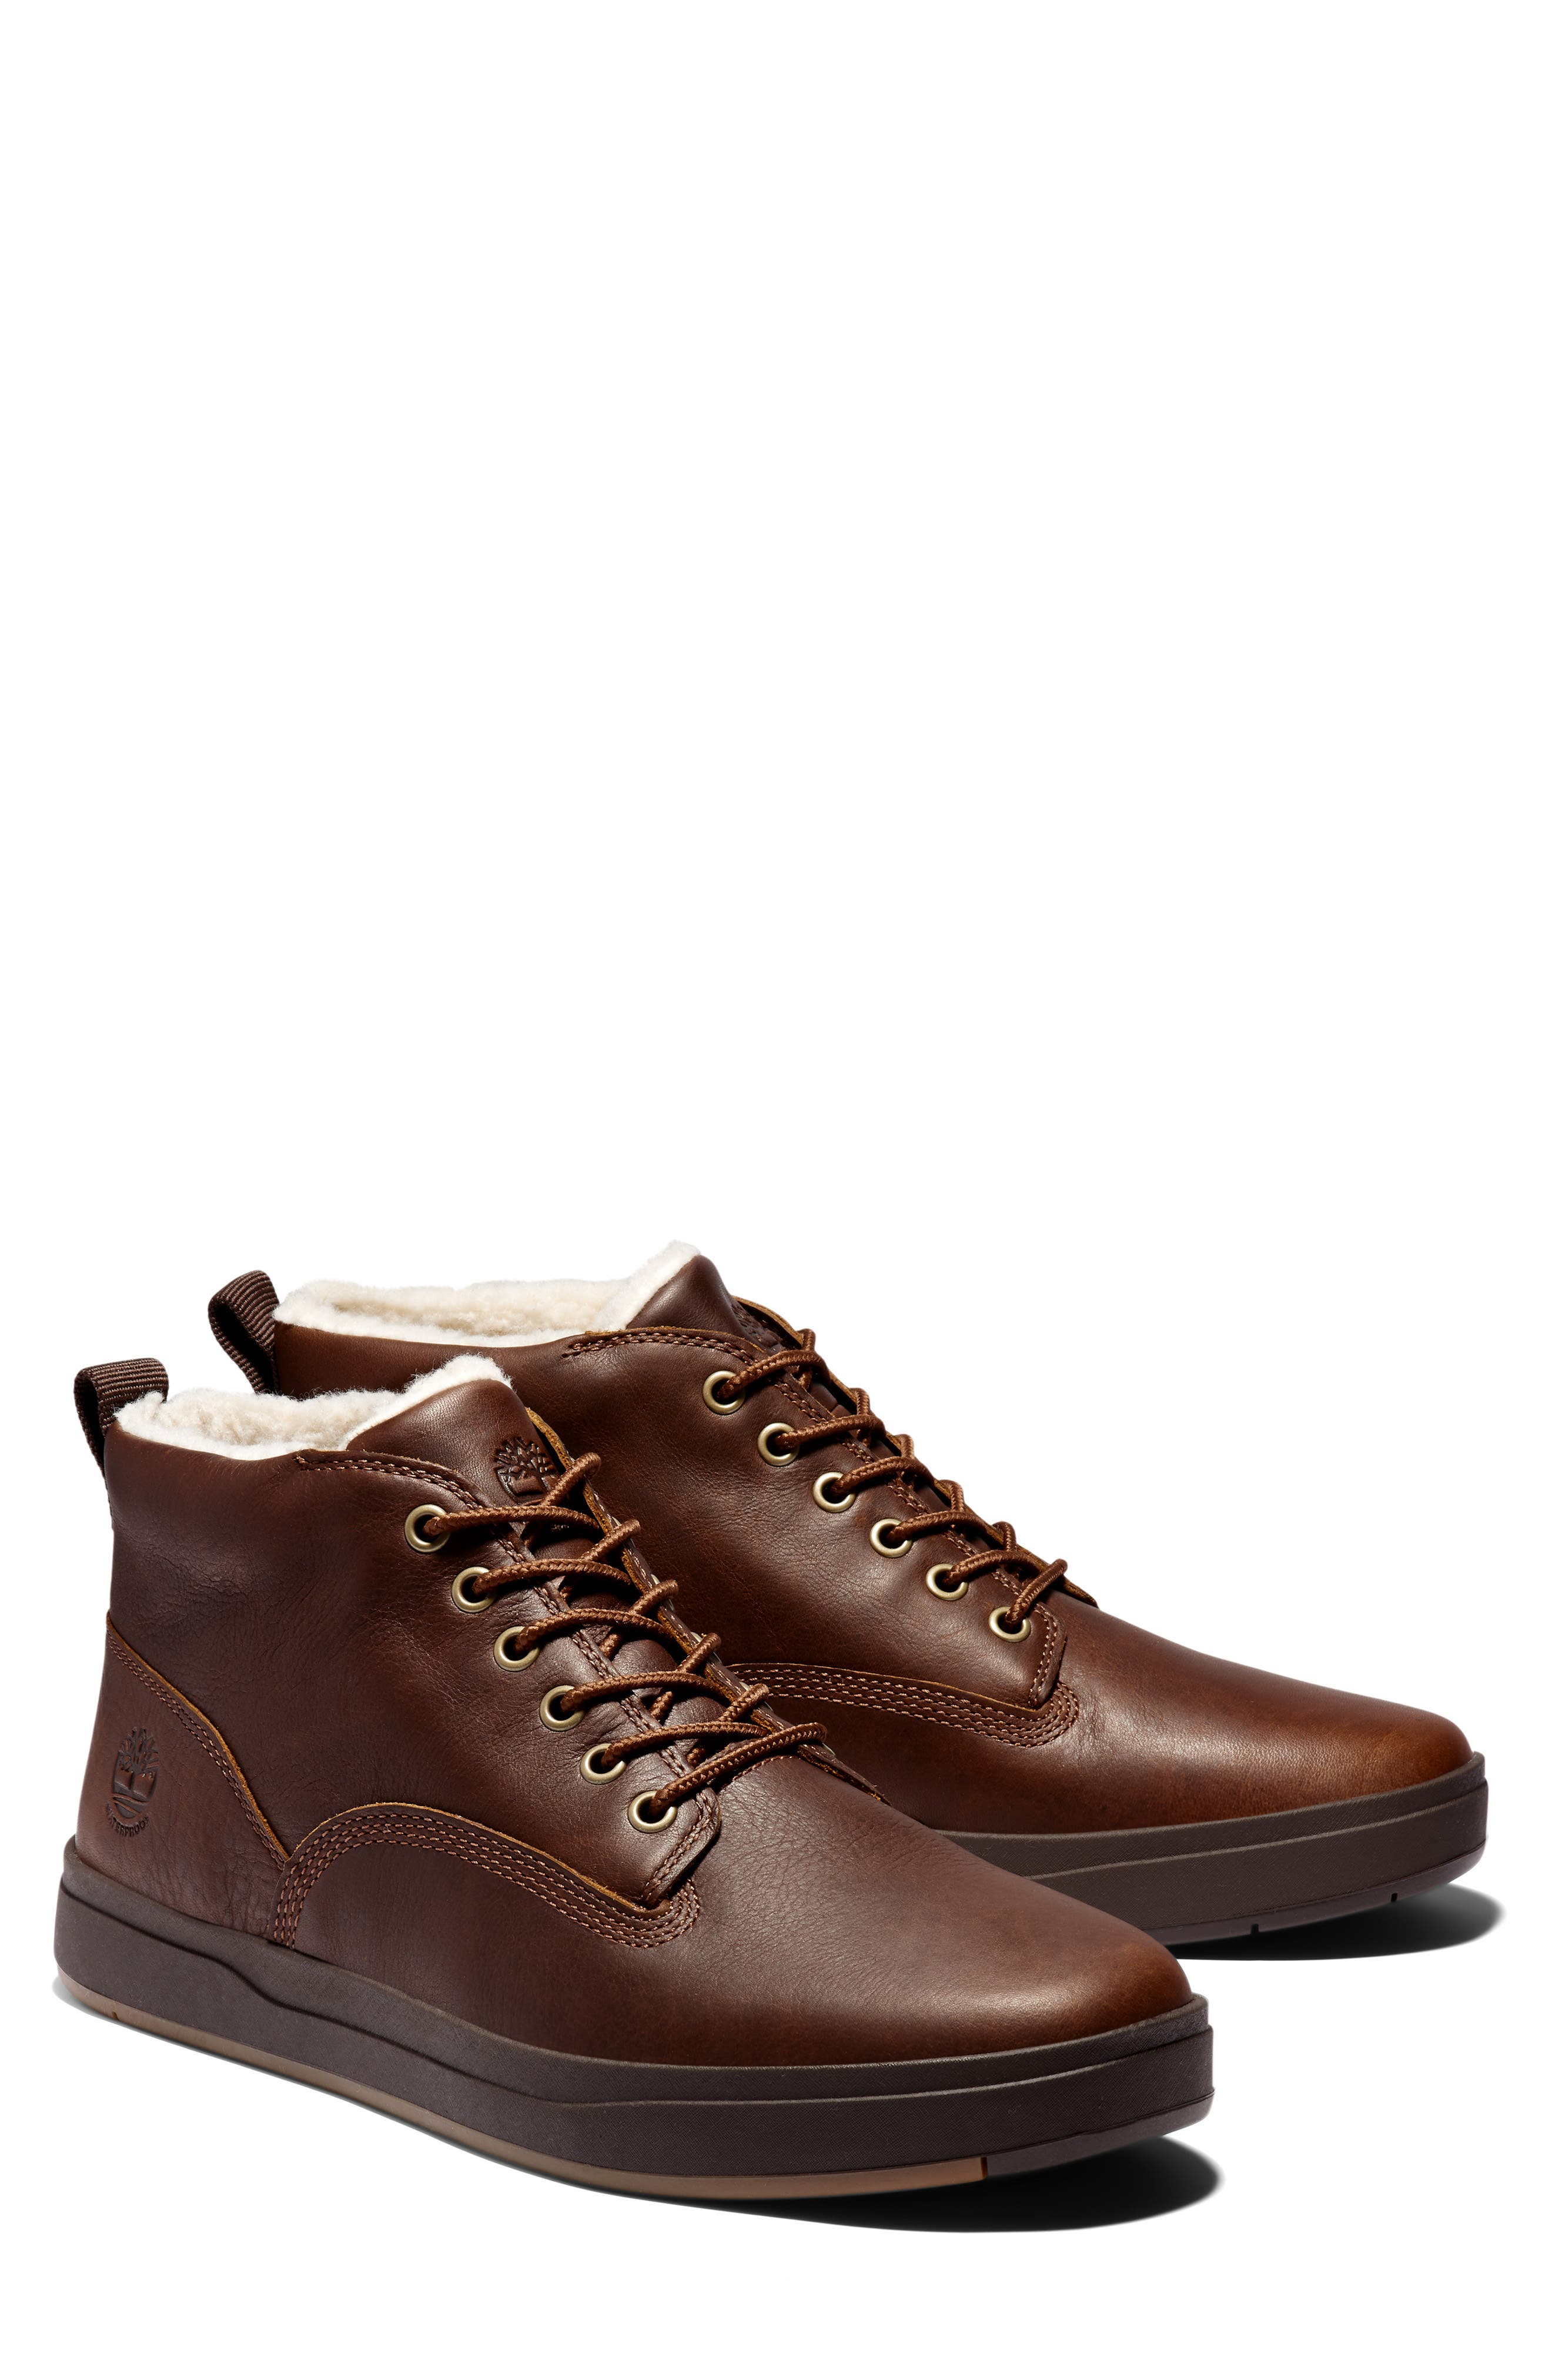 Men's Timberland Shoes | Nordstrom